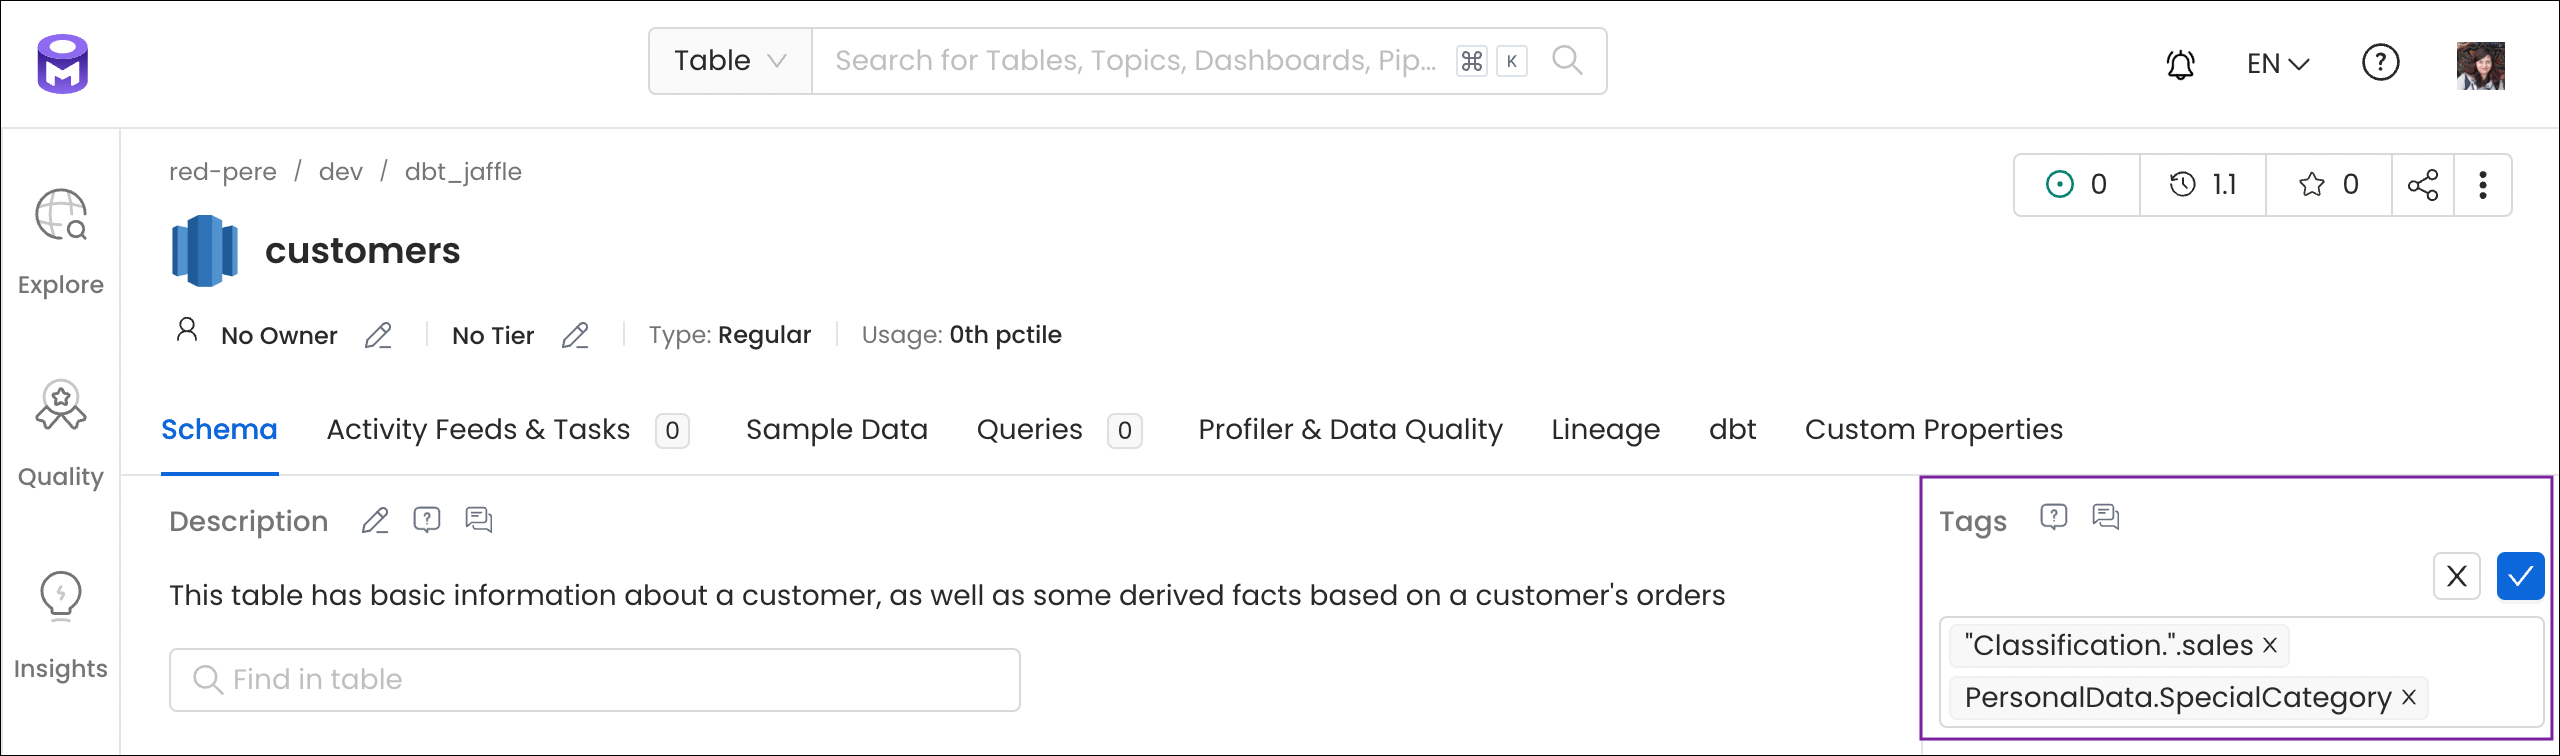 Add Tags to Classify Data Assets